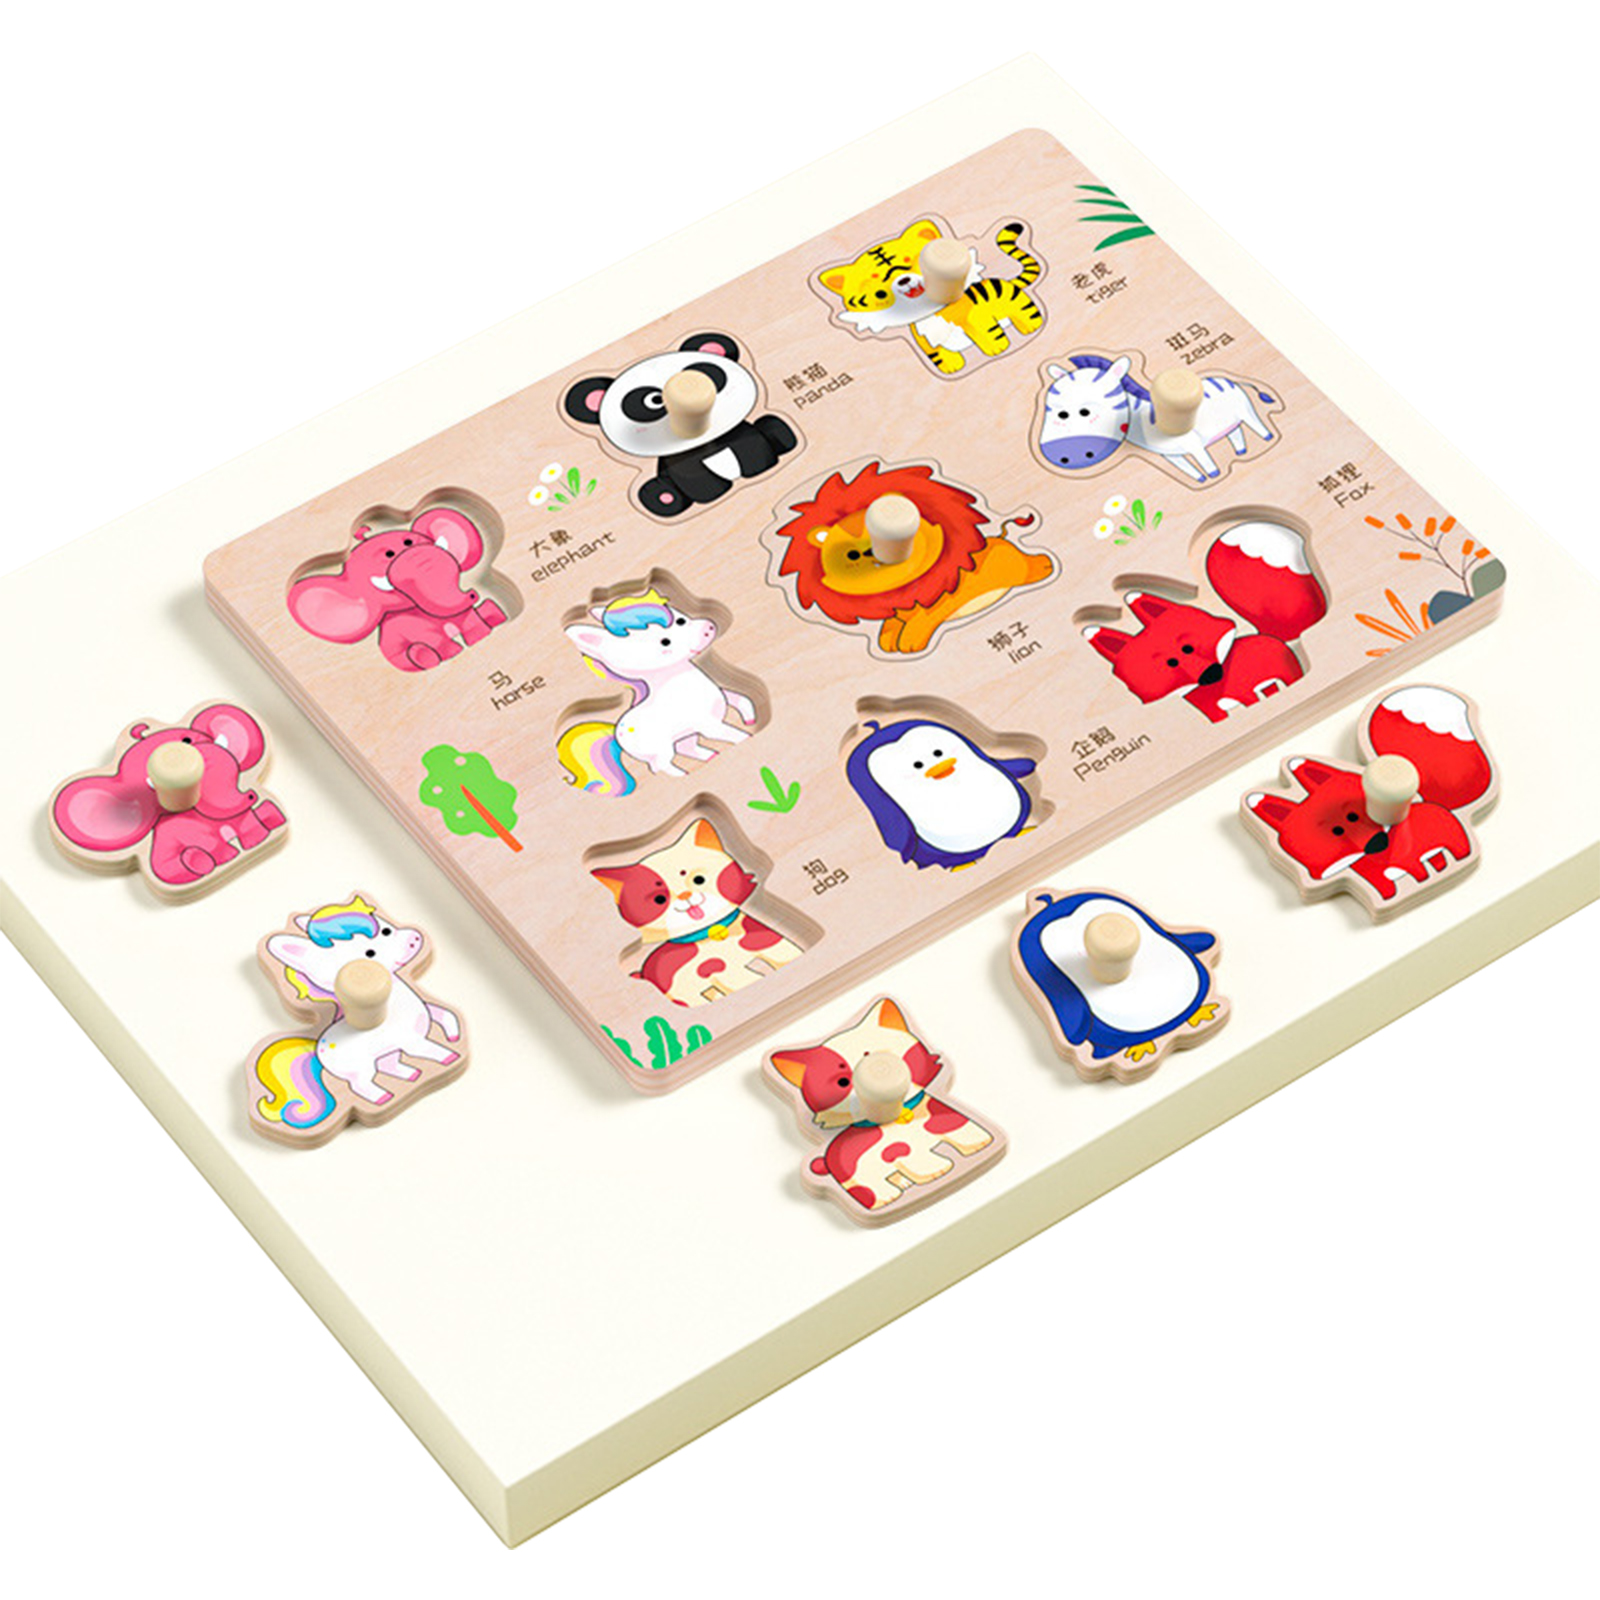 Wooden Puzzles For Toddlers 0-3 Years Old Wooden Peg Animal Traffic Shape Jigsaw Puzzles Early Educational Toys For Kids